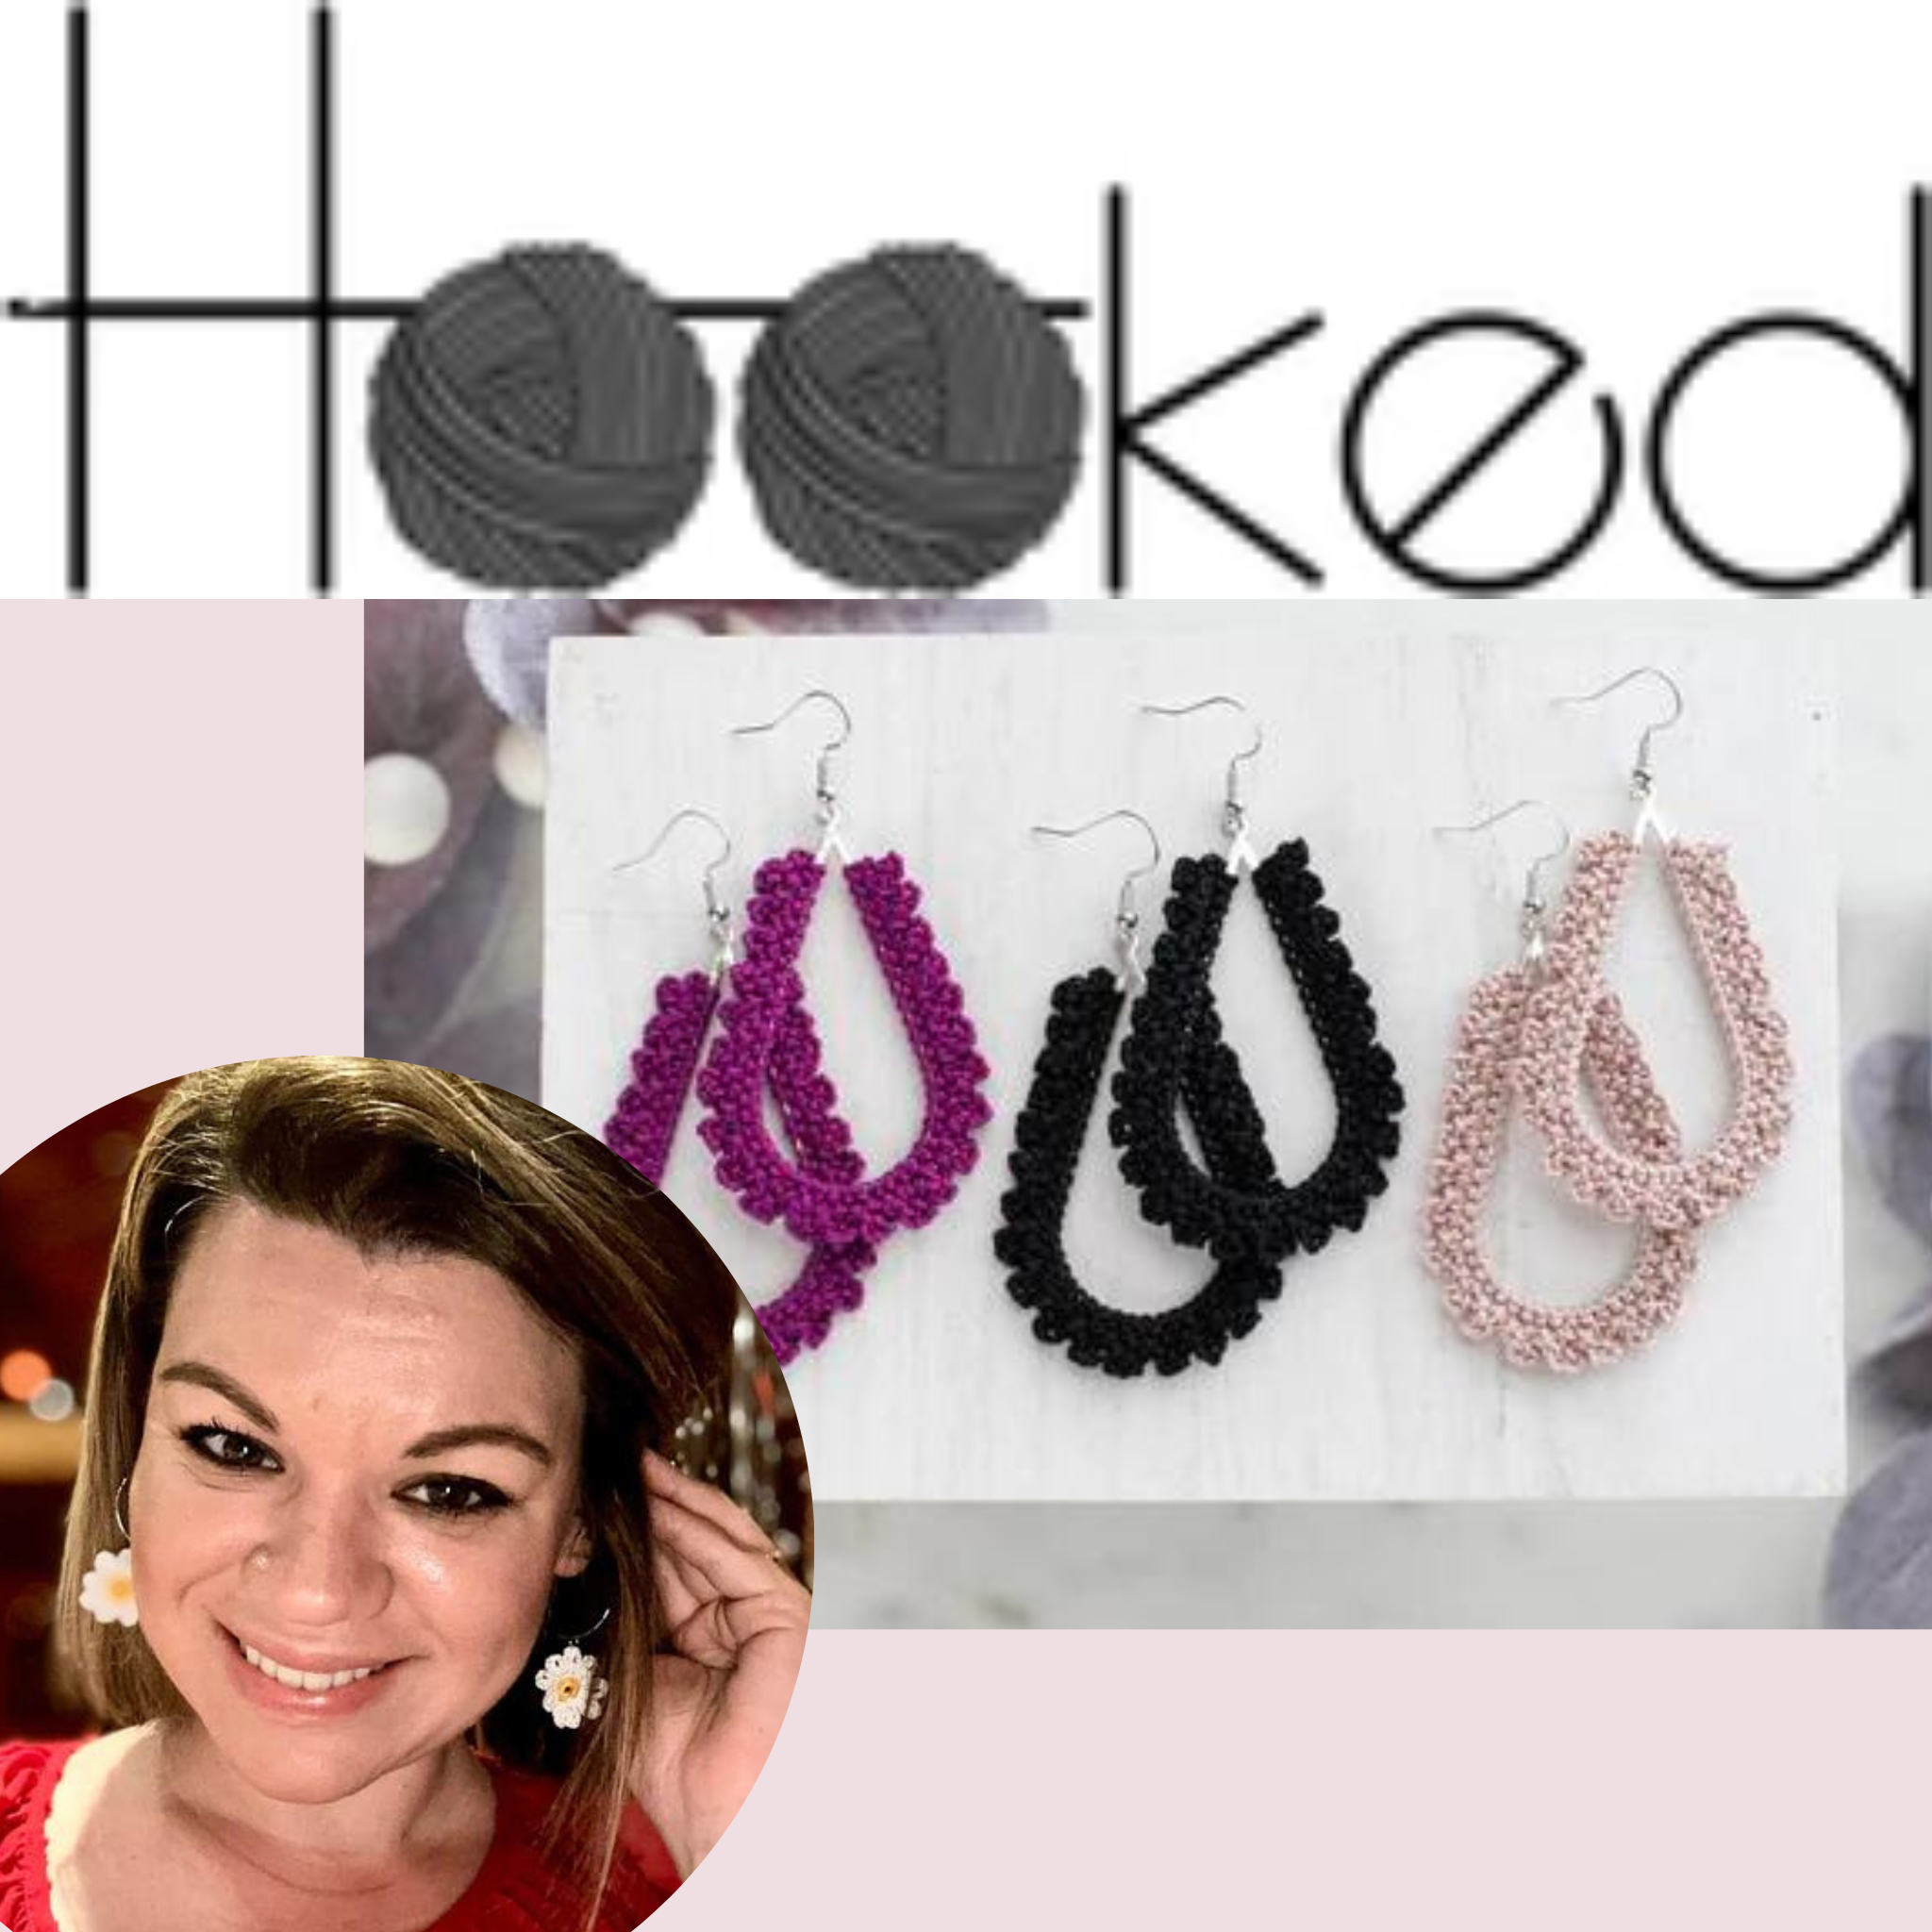 Monika Creator of the jewelry company Hooked Crochet with samples of her earrings